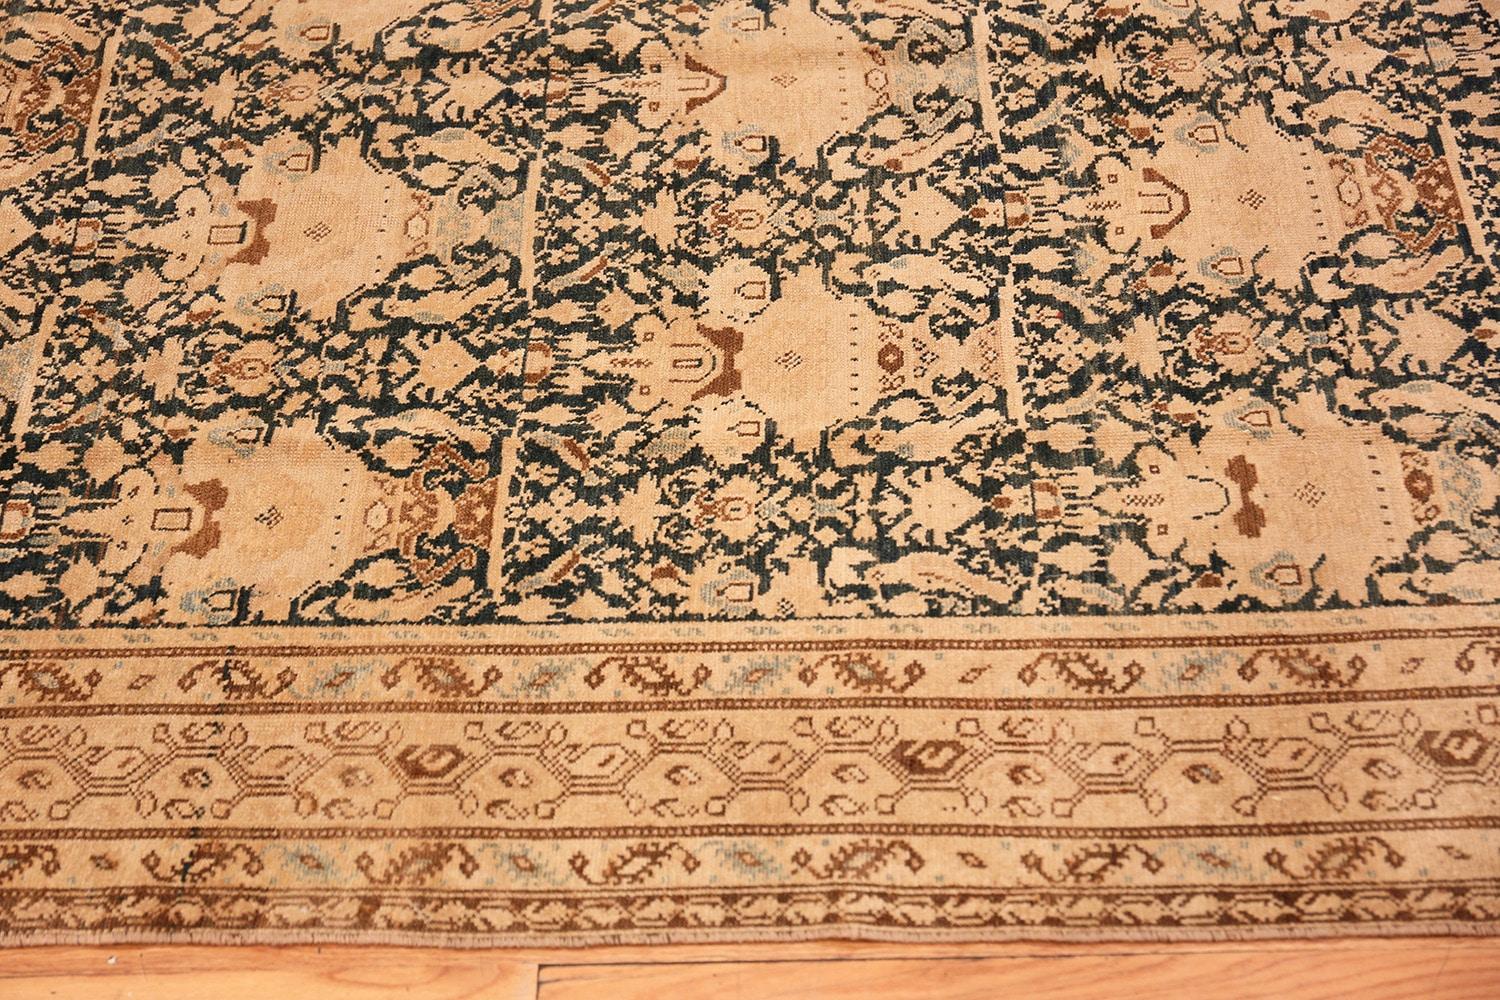 Hand-Knotted Gallery Size Antique Tribal Persian Malayer Rug. Size: 5 ft x 9 ft 9 in